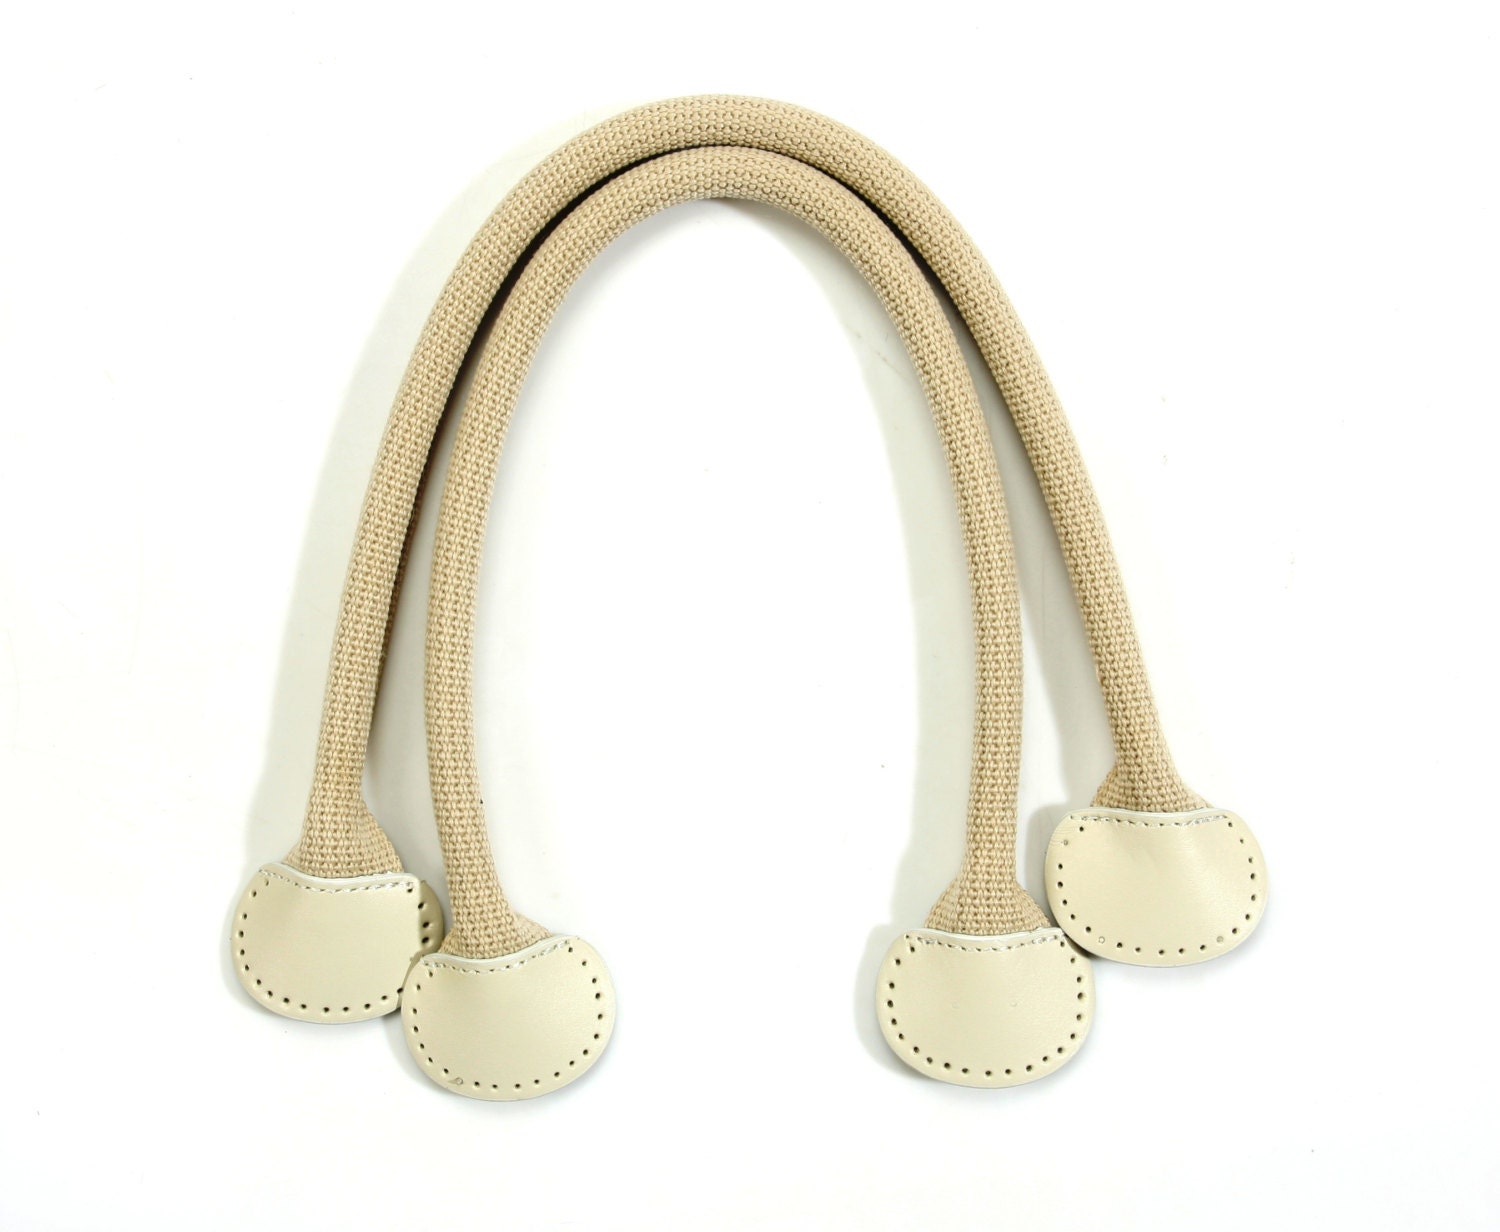 18.2 byhands 100% Genuine Leather Purse Handles & Bag Strap with Gold Style Ring, Ivory (22-4701)